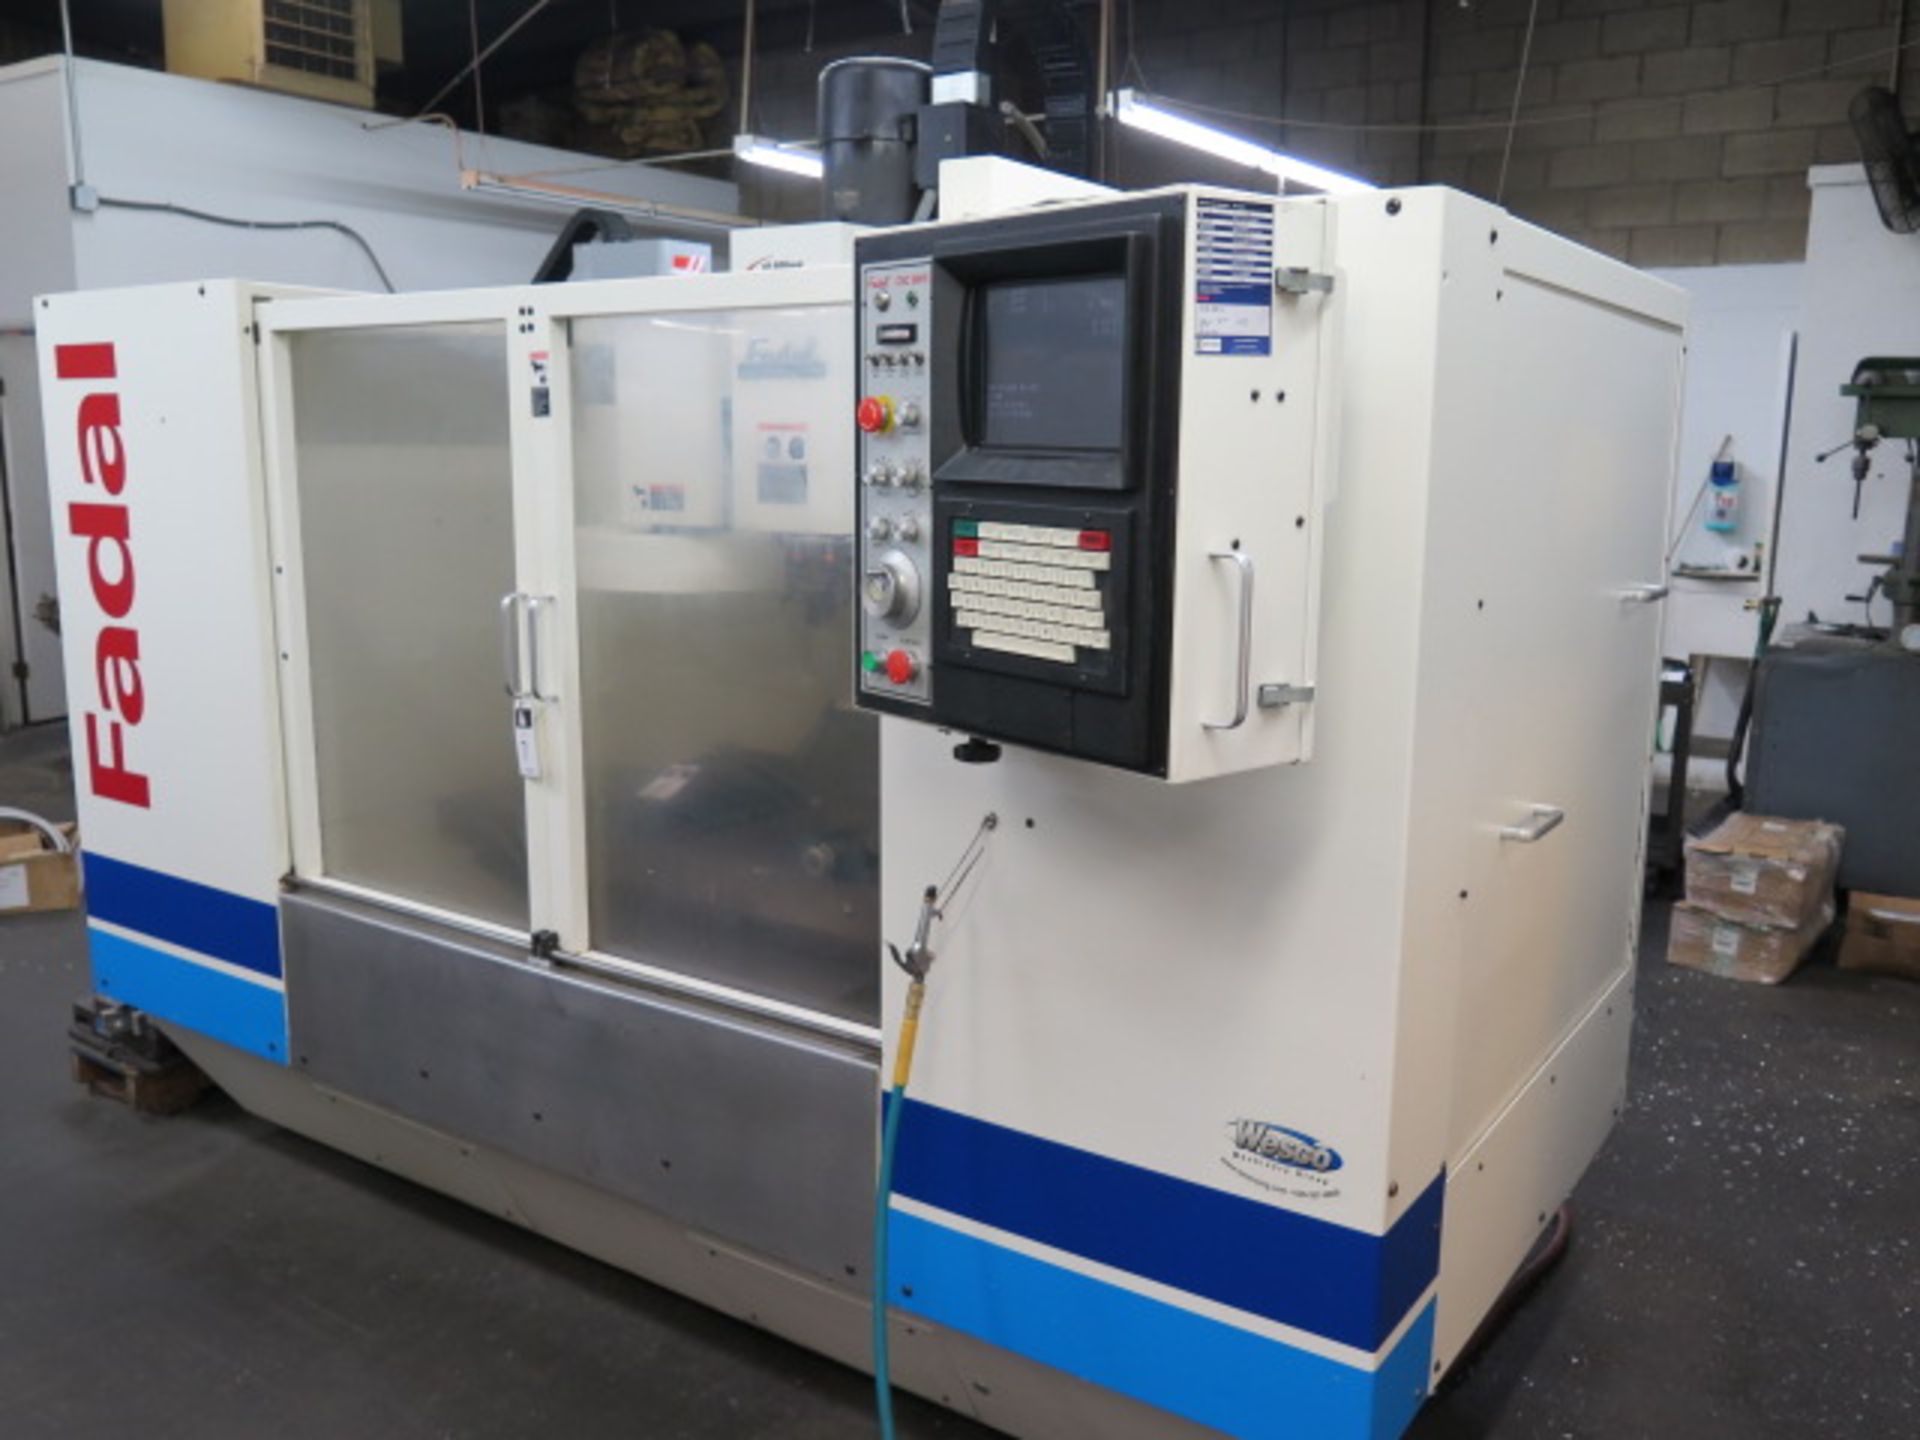 2013 Fadal VMC4020 CNC Vertical Machining Center s/n 1303070690 ( Wesco Factory Rebuilt in 2013 ) w/ - Image 2 of 12